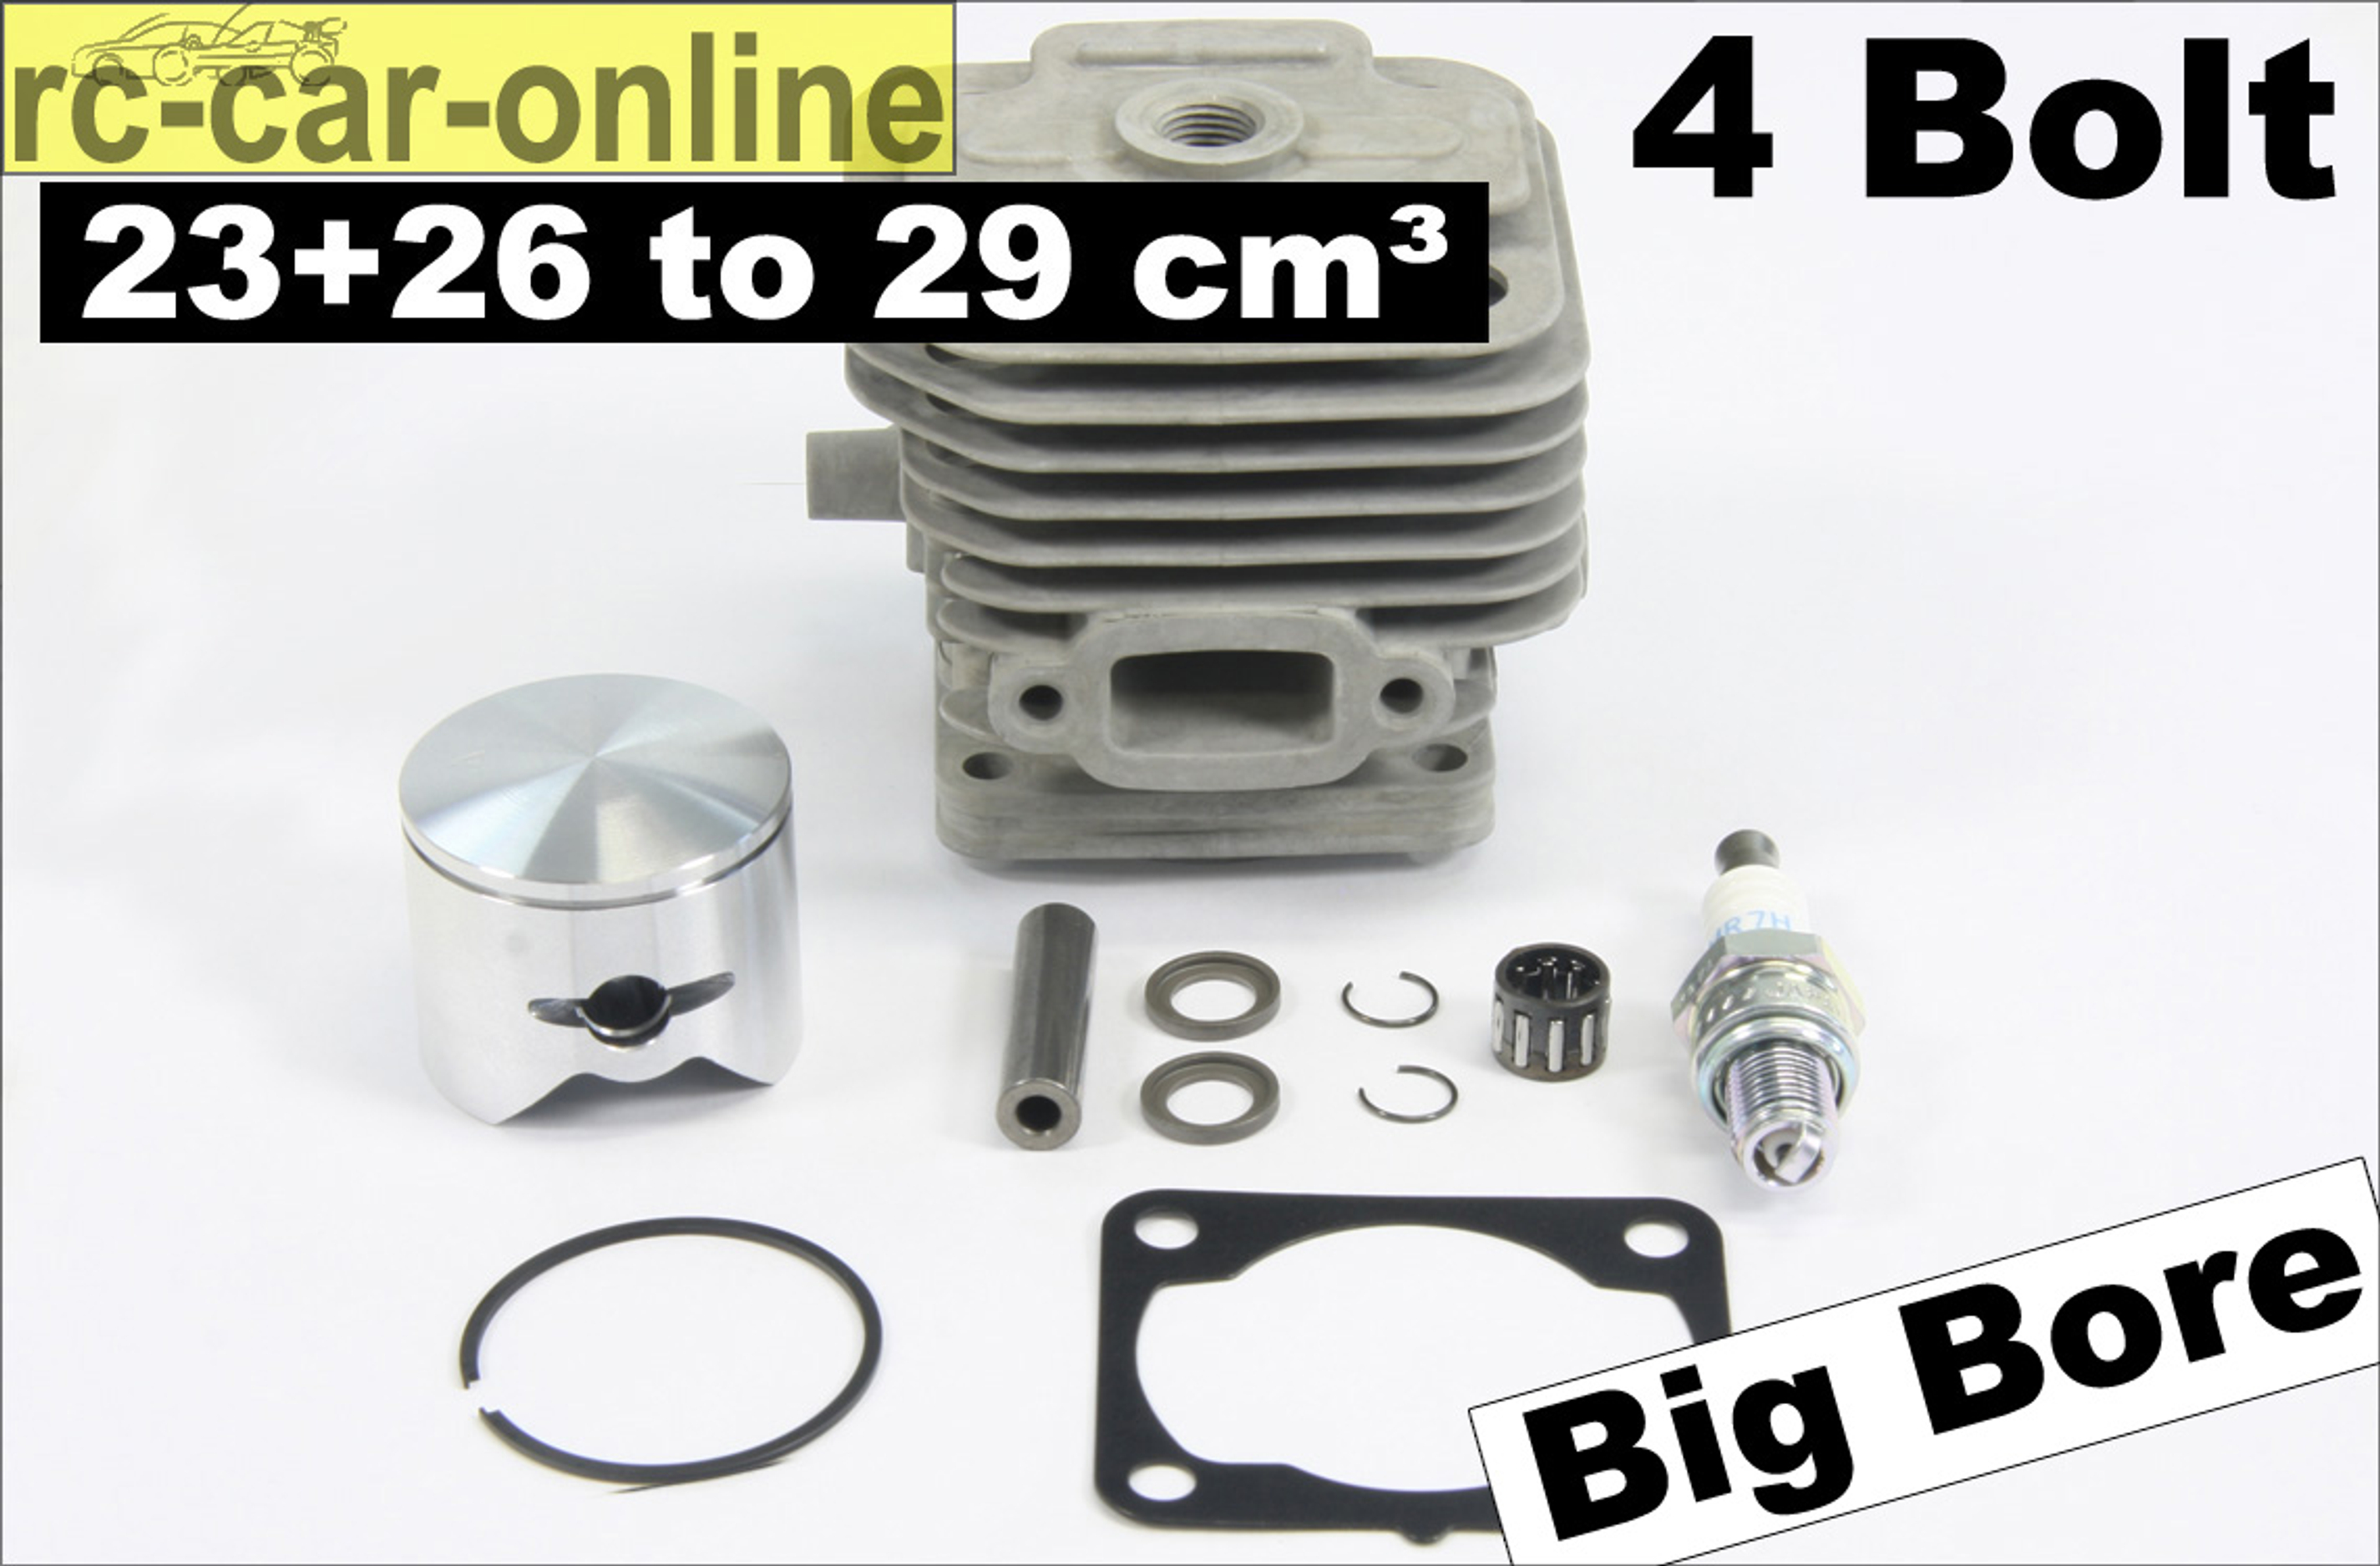 7786 FG Original Zenoah 4 Bolt Cylinder/Piston set from 23 cm³ or 26 cm³ to 29 cm³ for the G240 and G270 to 290, set